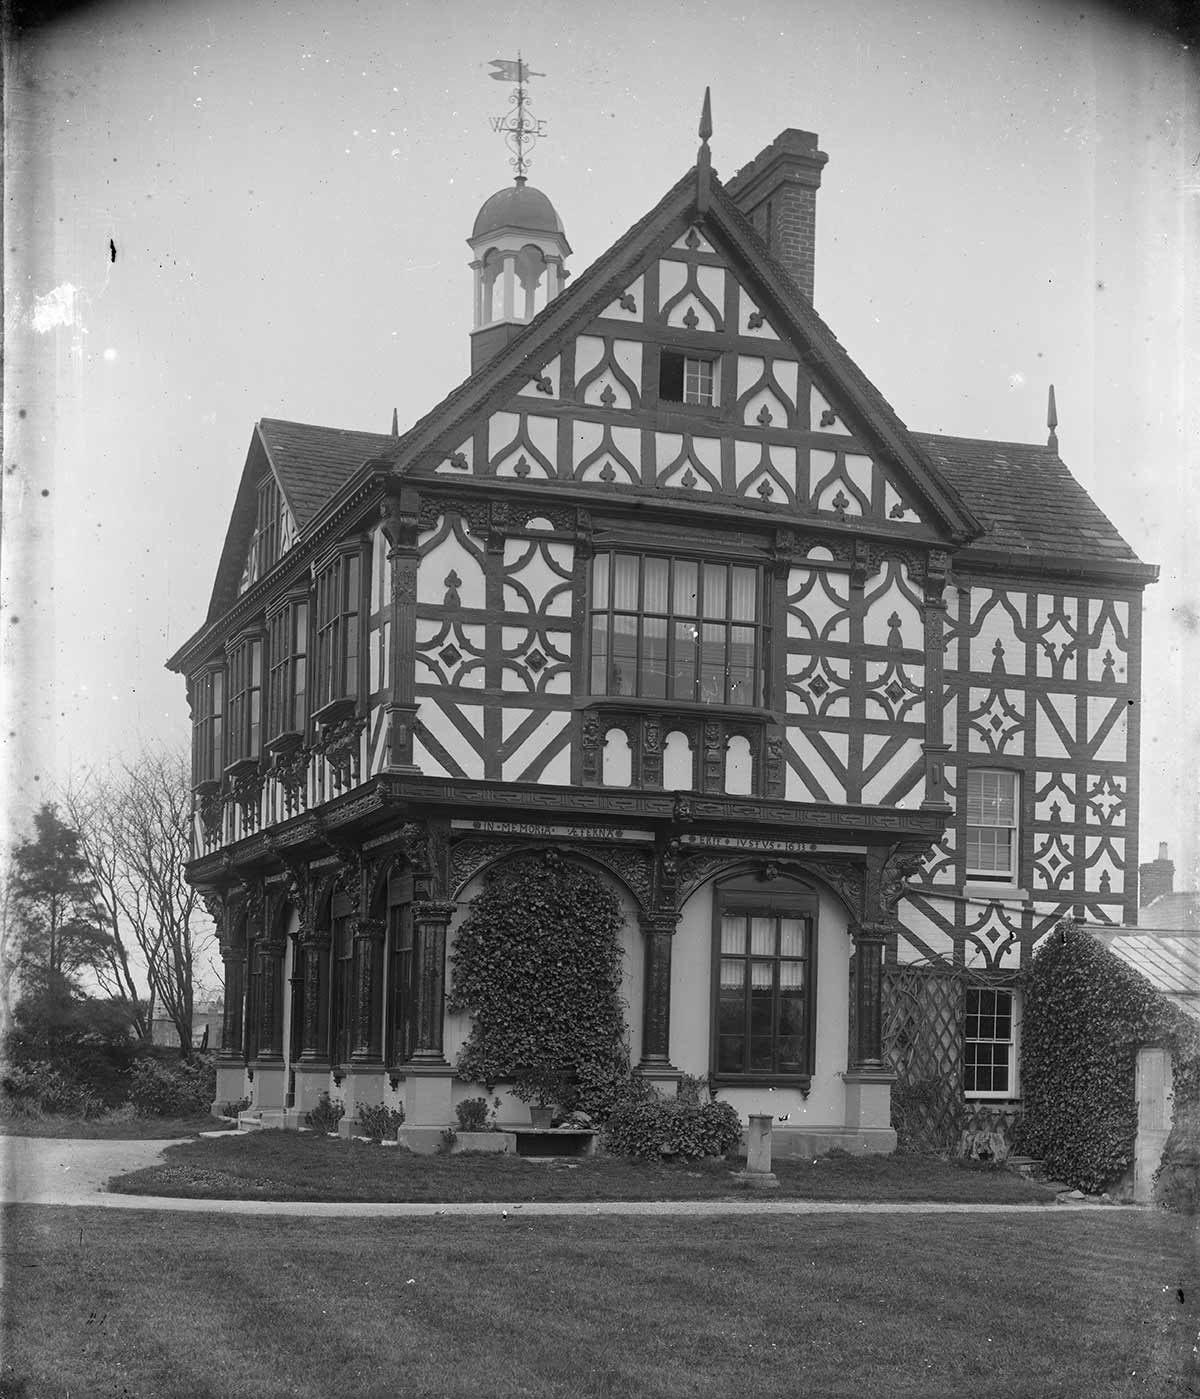 The Market House as a private residence, called Grange Court. © Herefordshire Museum Service.